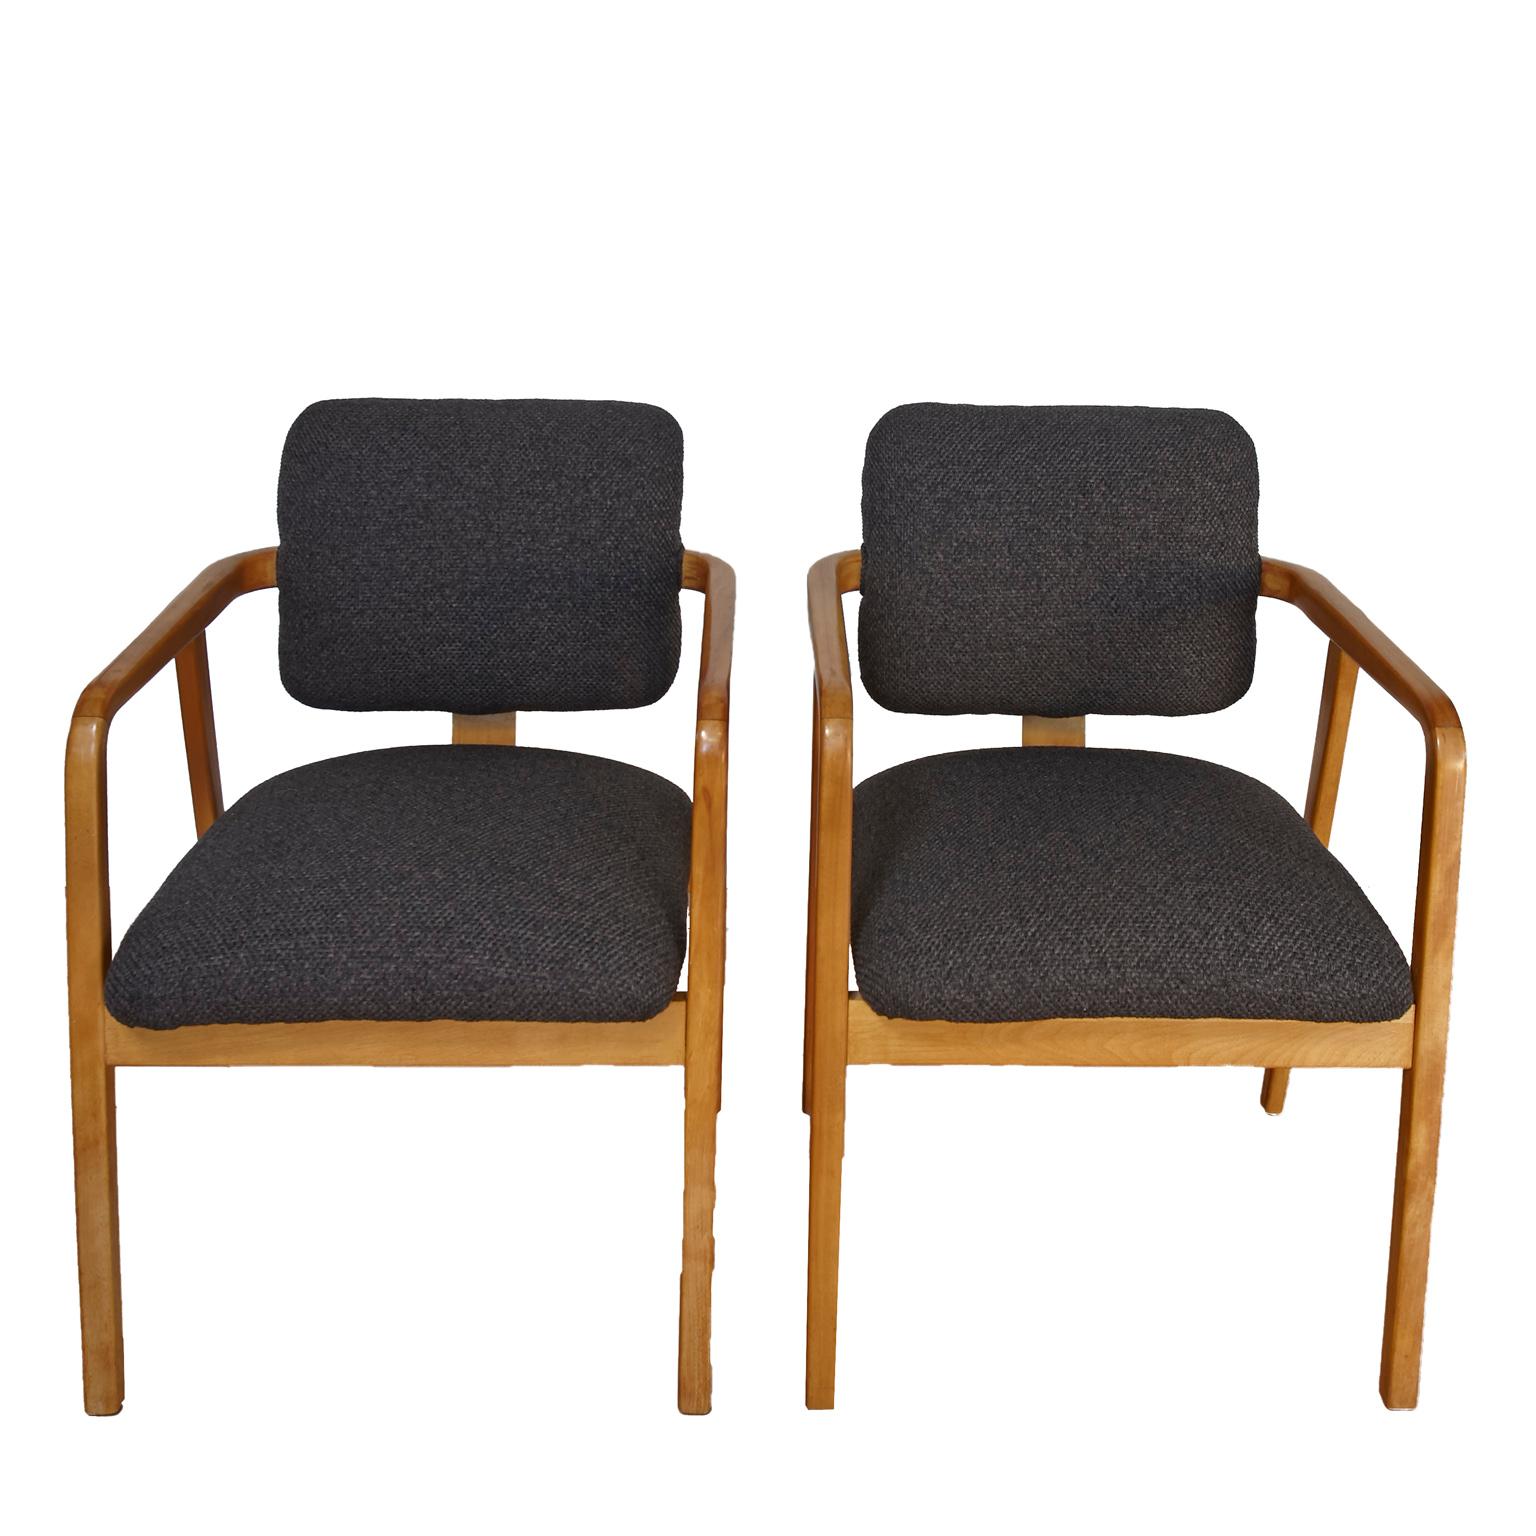 Set of 6 George Nelson for Herman Miller dining chairs, two armchairs and four cane back side chairs.
New caning and upholstery and foam for side chairs. New upholstery for two arm chairs.
These chairs were manufactured from 1947-1954. A Beautiful